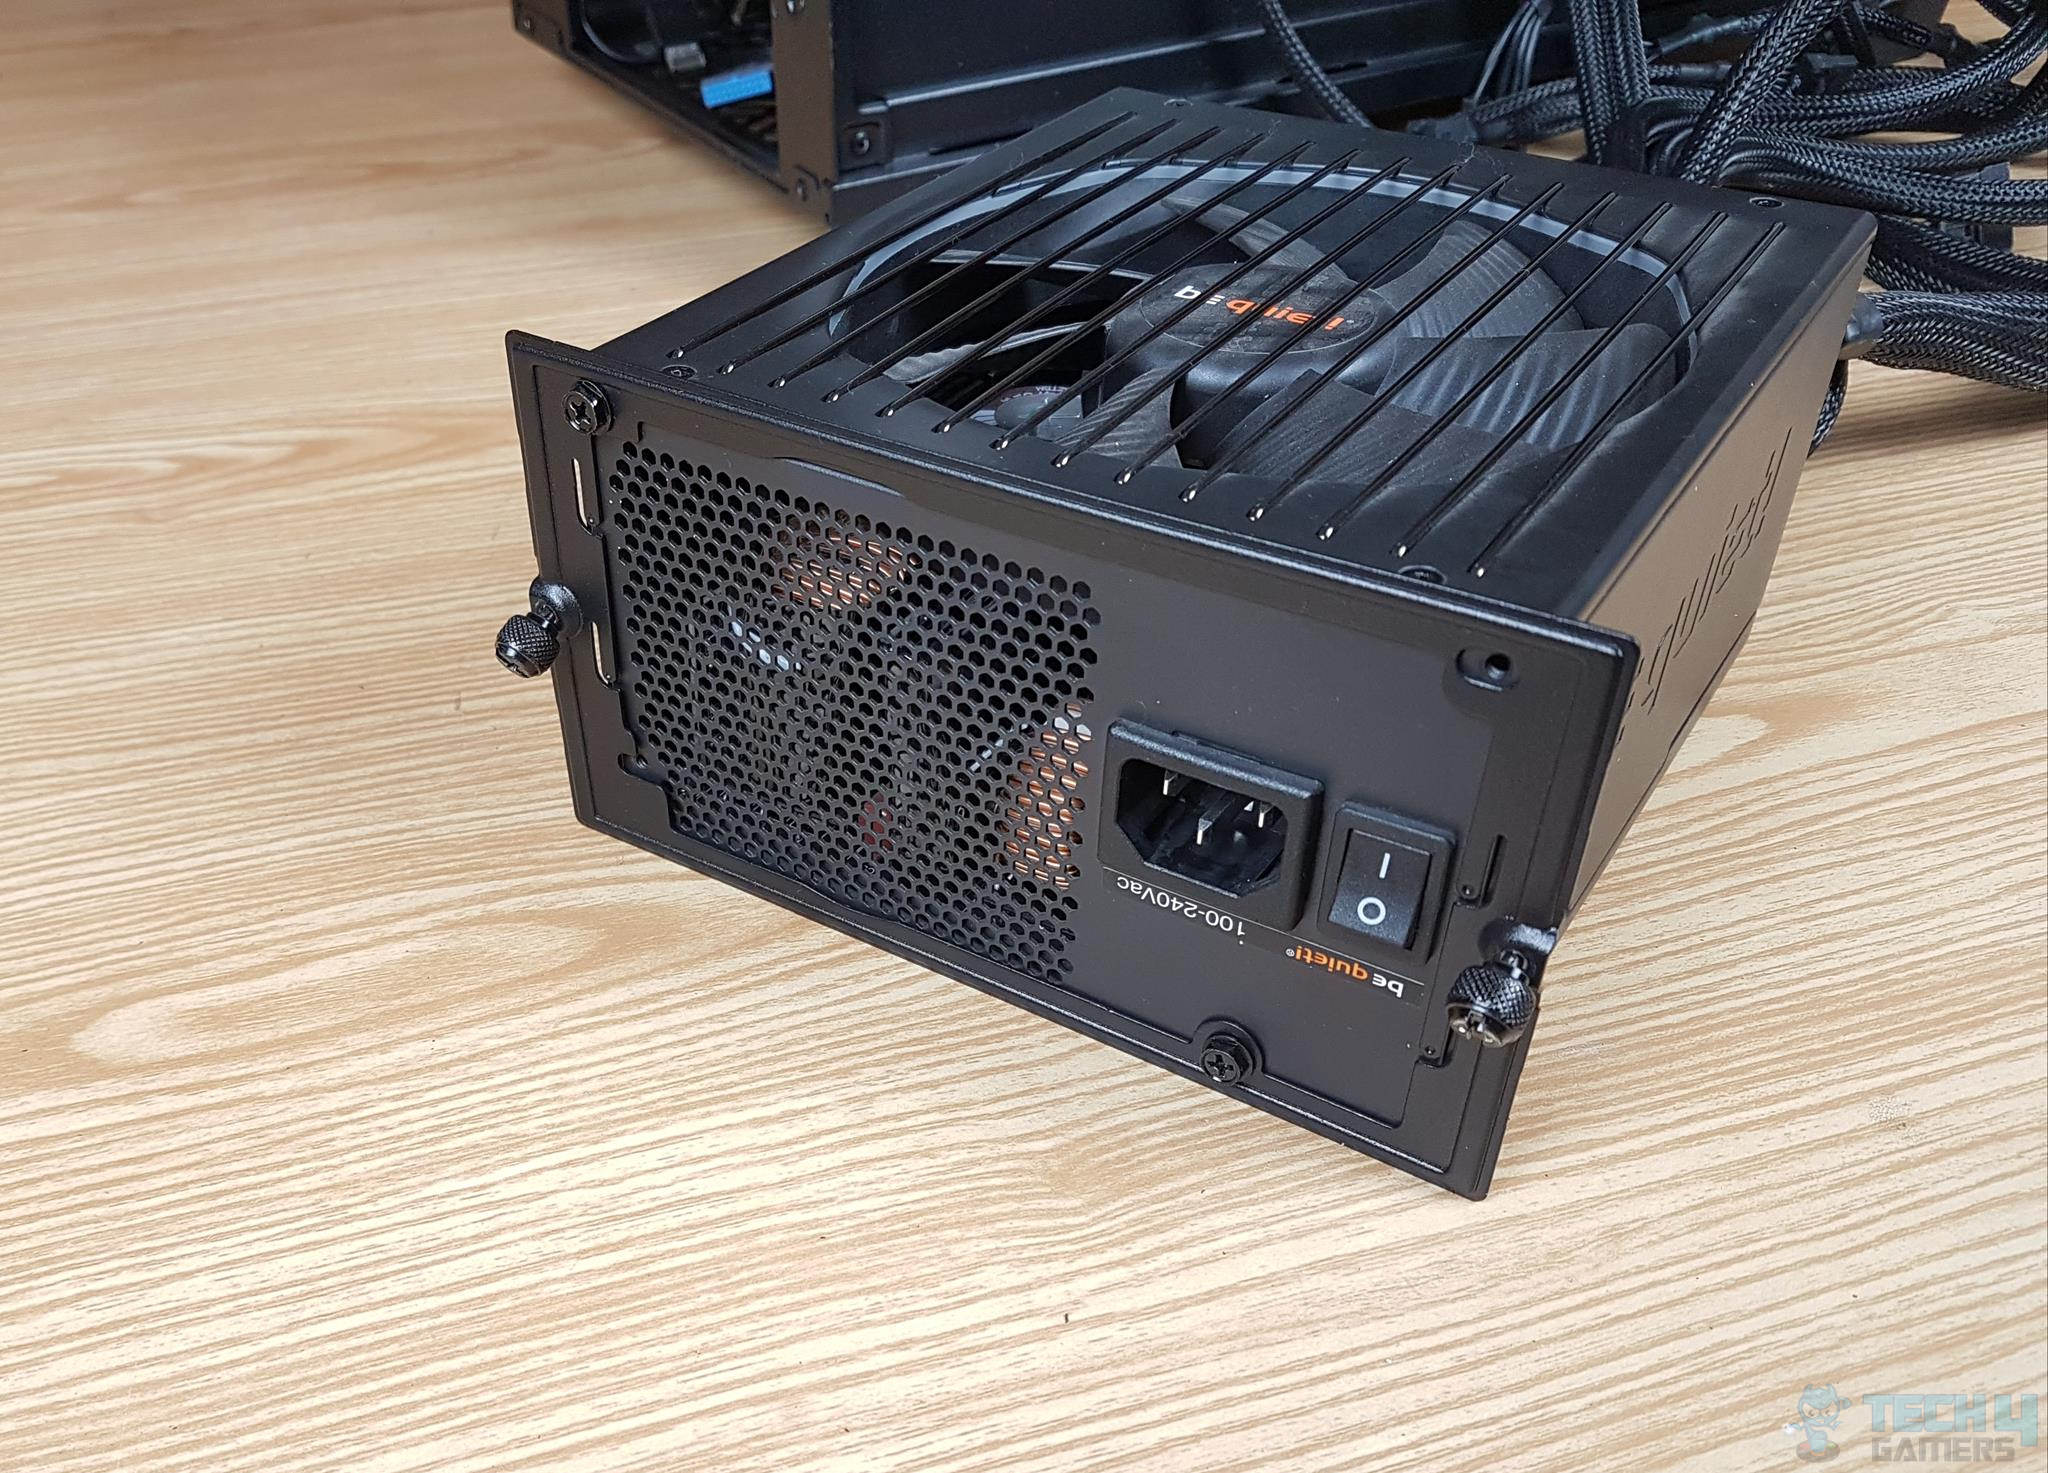 Installing the PSU (Image By Tech4Gamers)